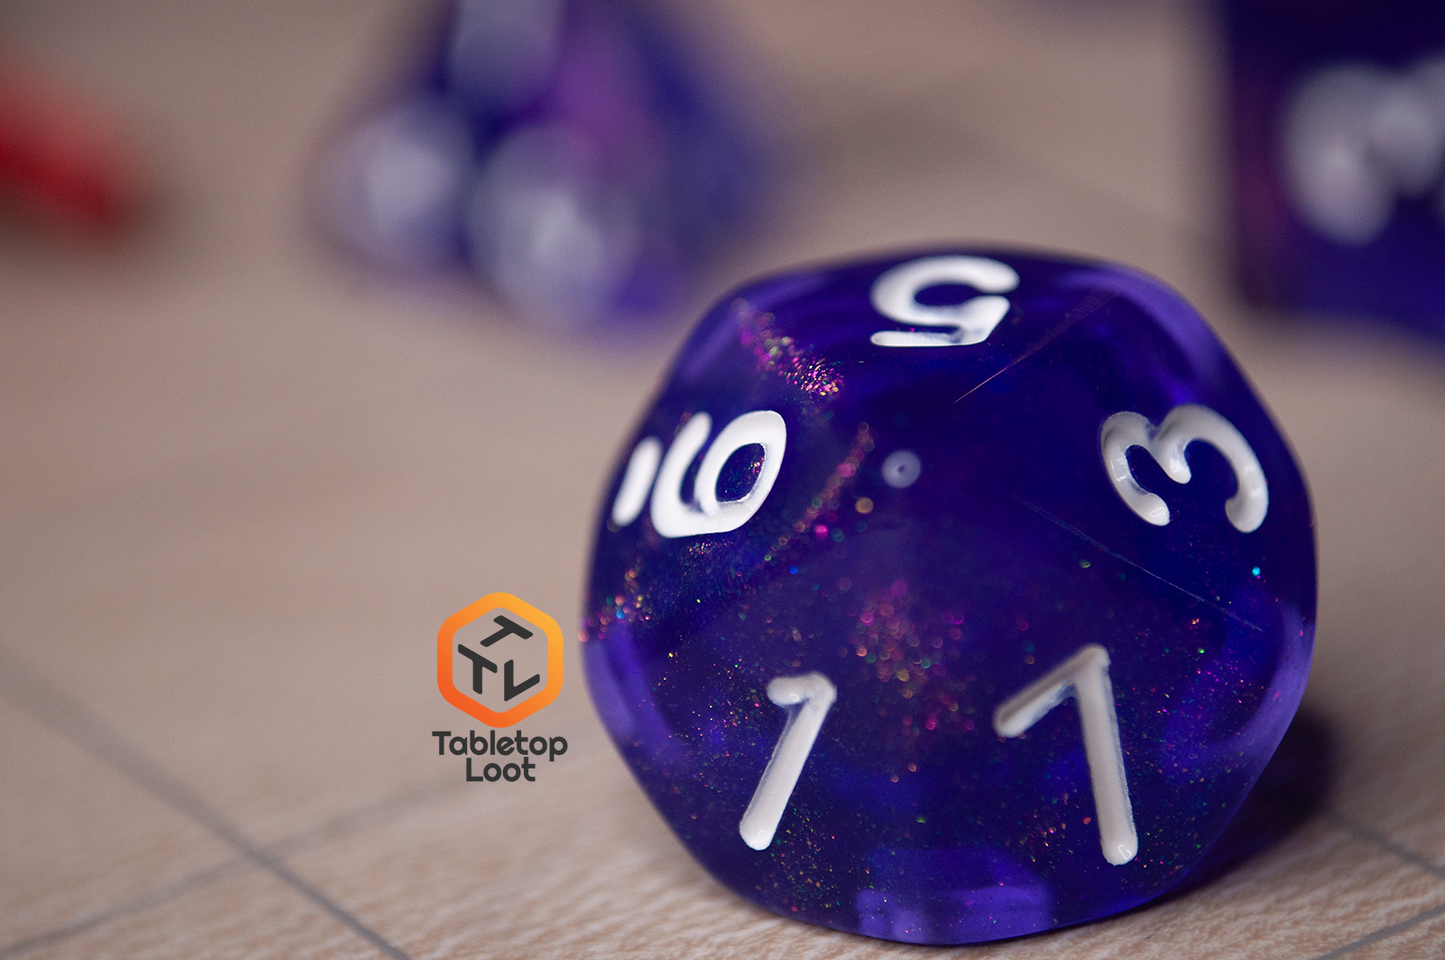 A close up of the D10 from the Diamond Purple 7 piece dice set from Tabletop Loot with purple dice filled with micro glitter and white numbering.